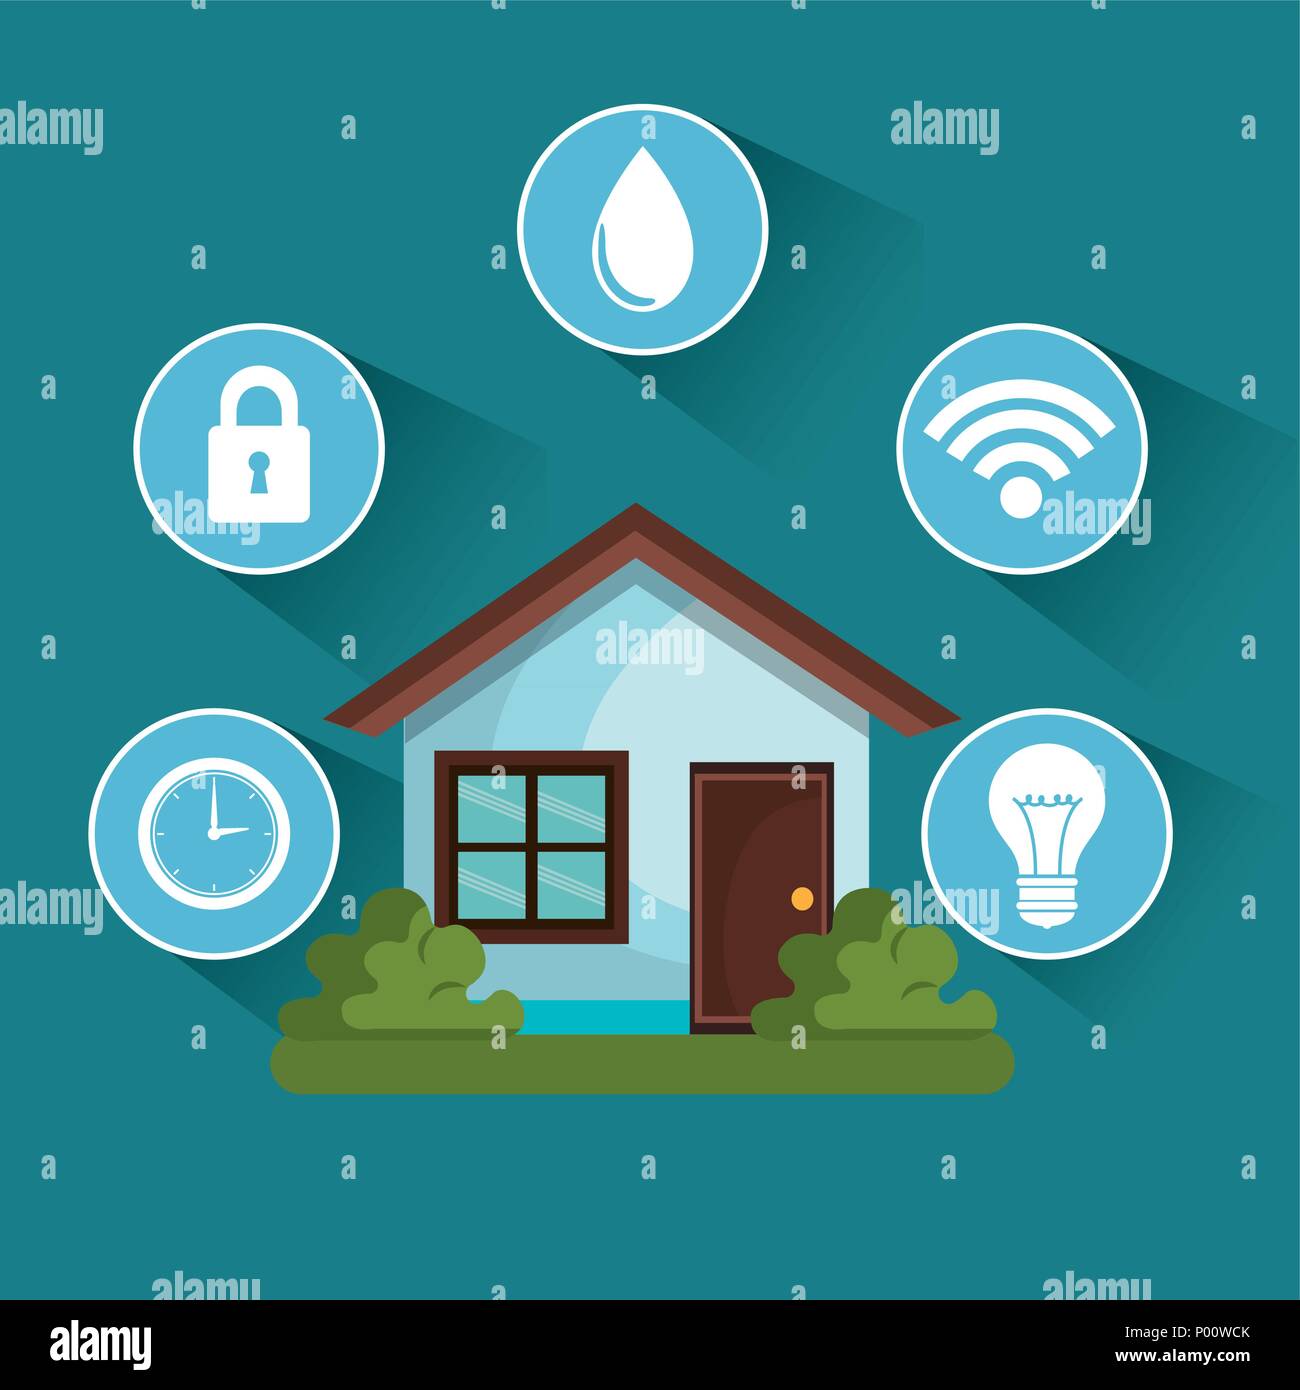 smart home technology set icons Stock Vector